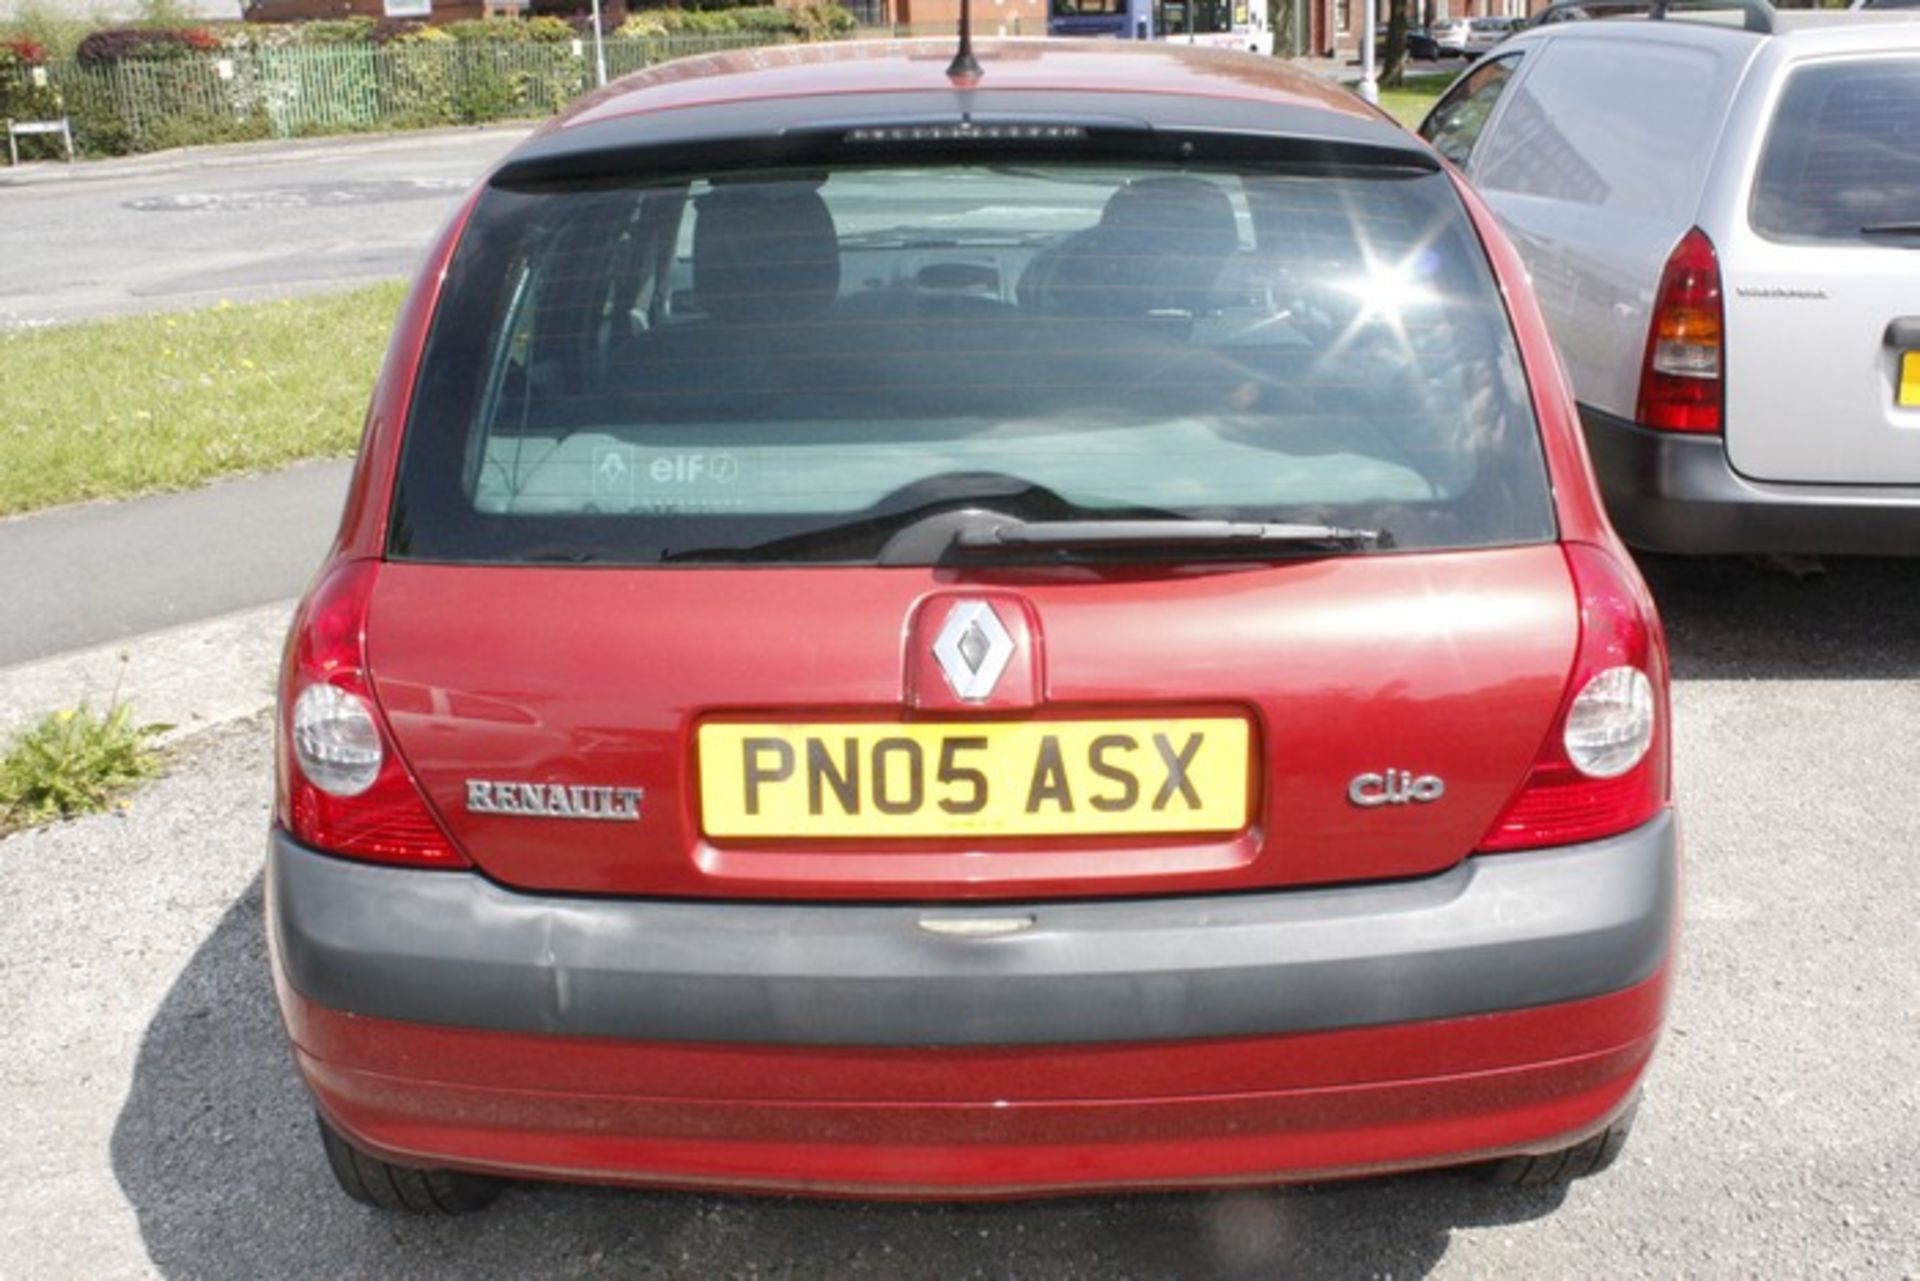 RENAULT CLIO EXPRESSION 1200CC, REGISTERED MARCH 2005, PN05 ASX, 12 MONTHS MOT, REMOTE CENTRAL - Image 5 of 11